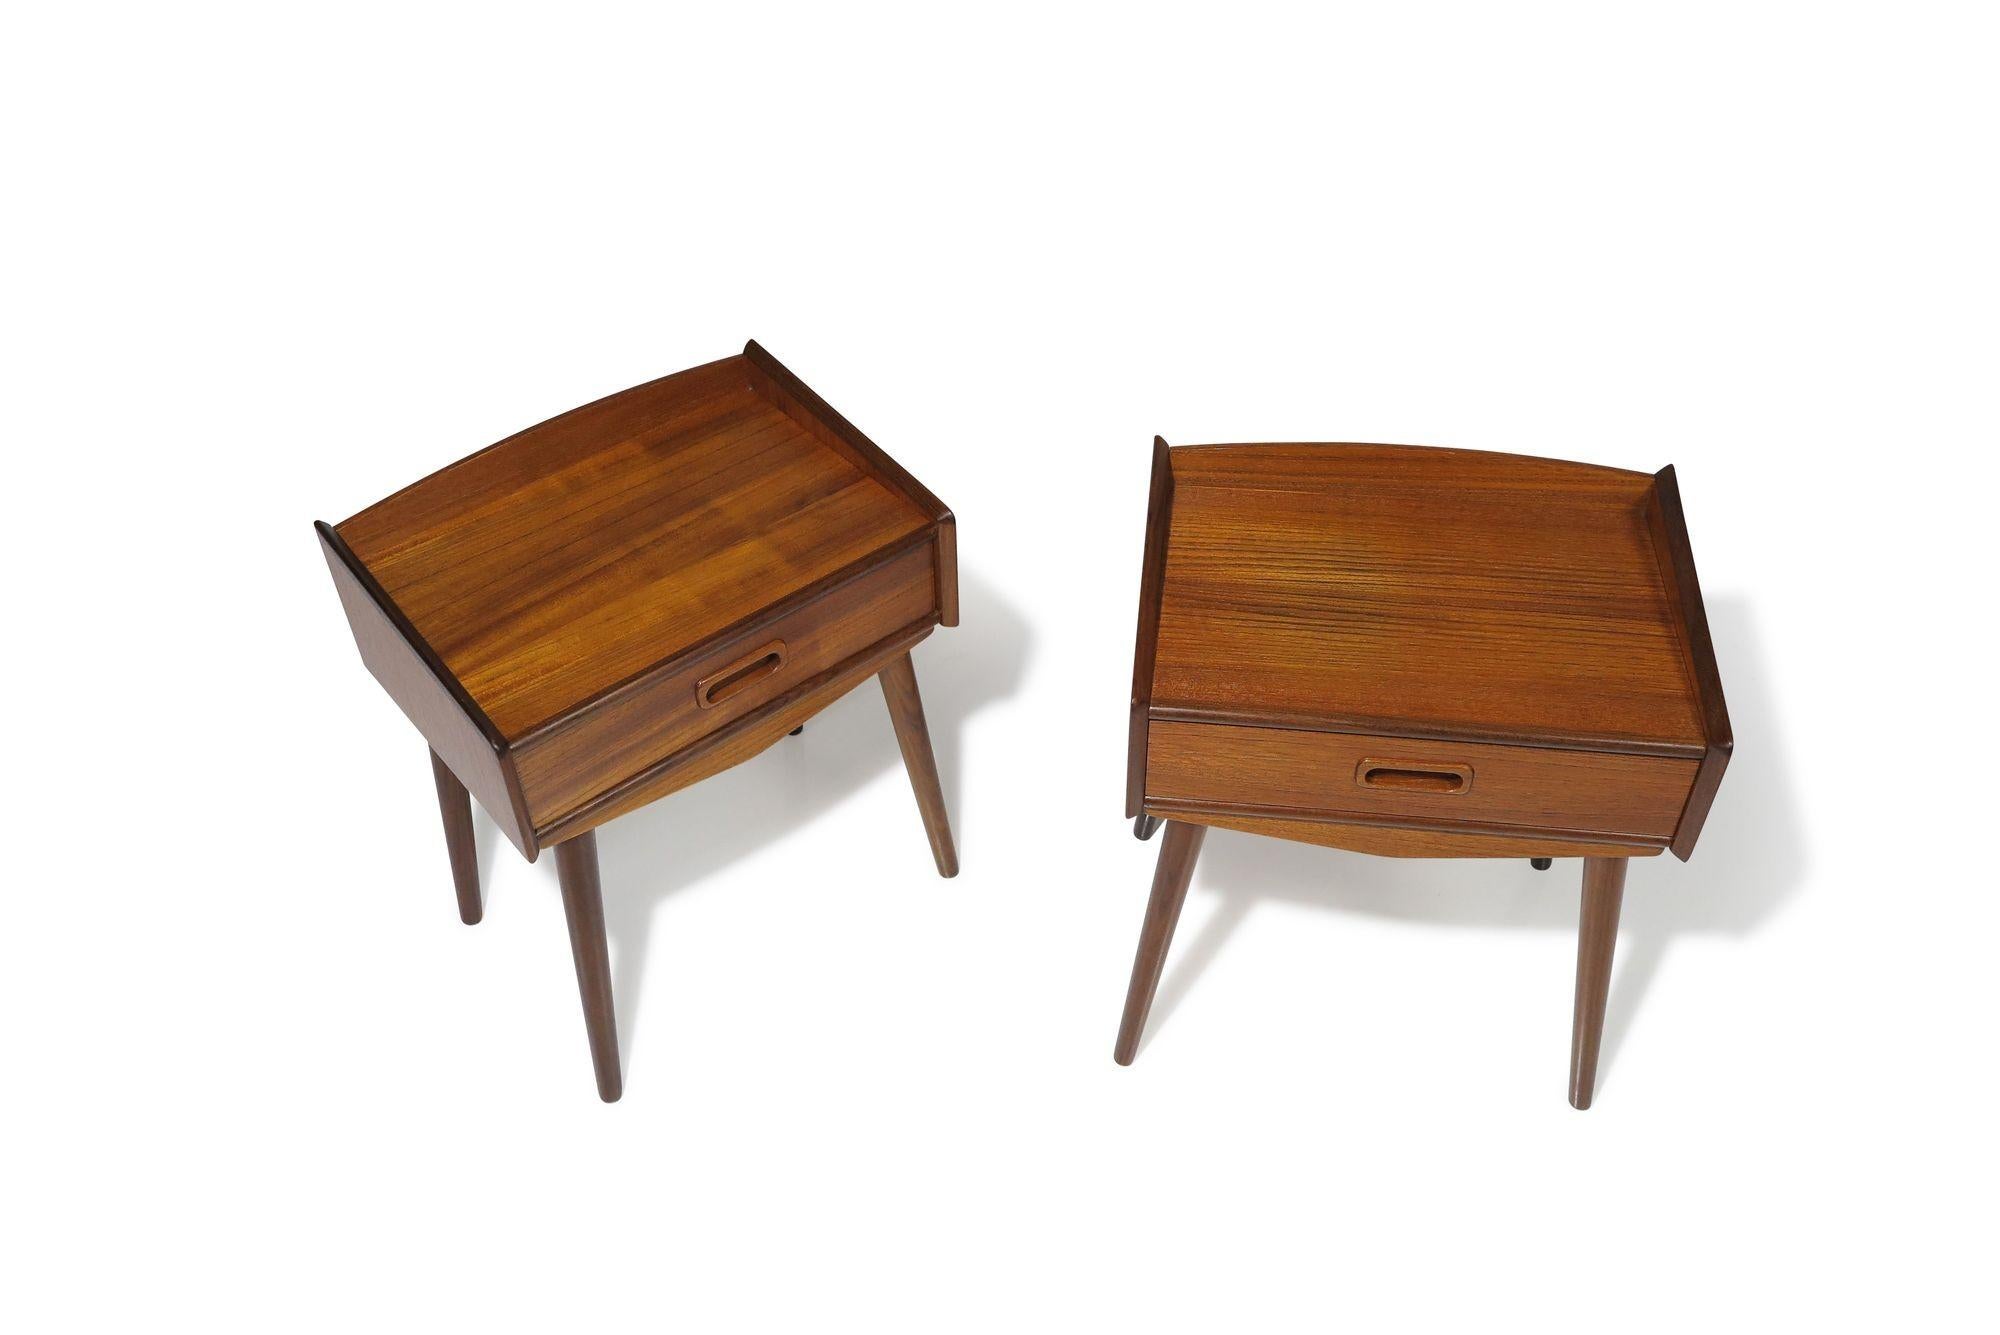 Danish teak nightstands by Uhrhøj Møbelfabrik, 1962, Denmark. These nightstands are crafted from teak and feature a single drawer with carved pulls, elegantly raised on flared tapered teak legs. The cabinets have undergone a full restoration,